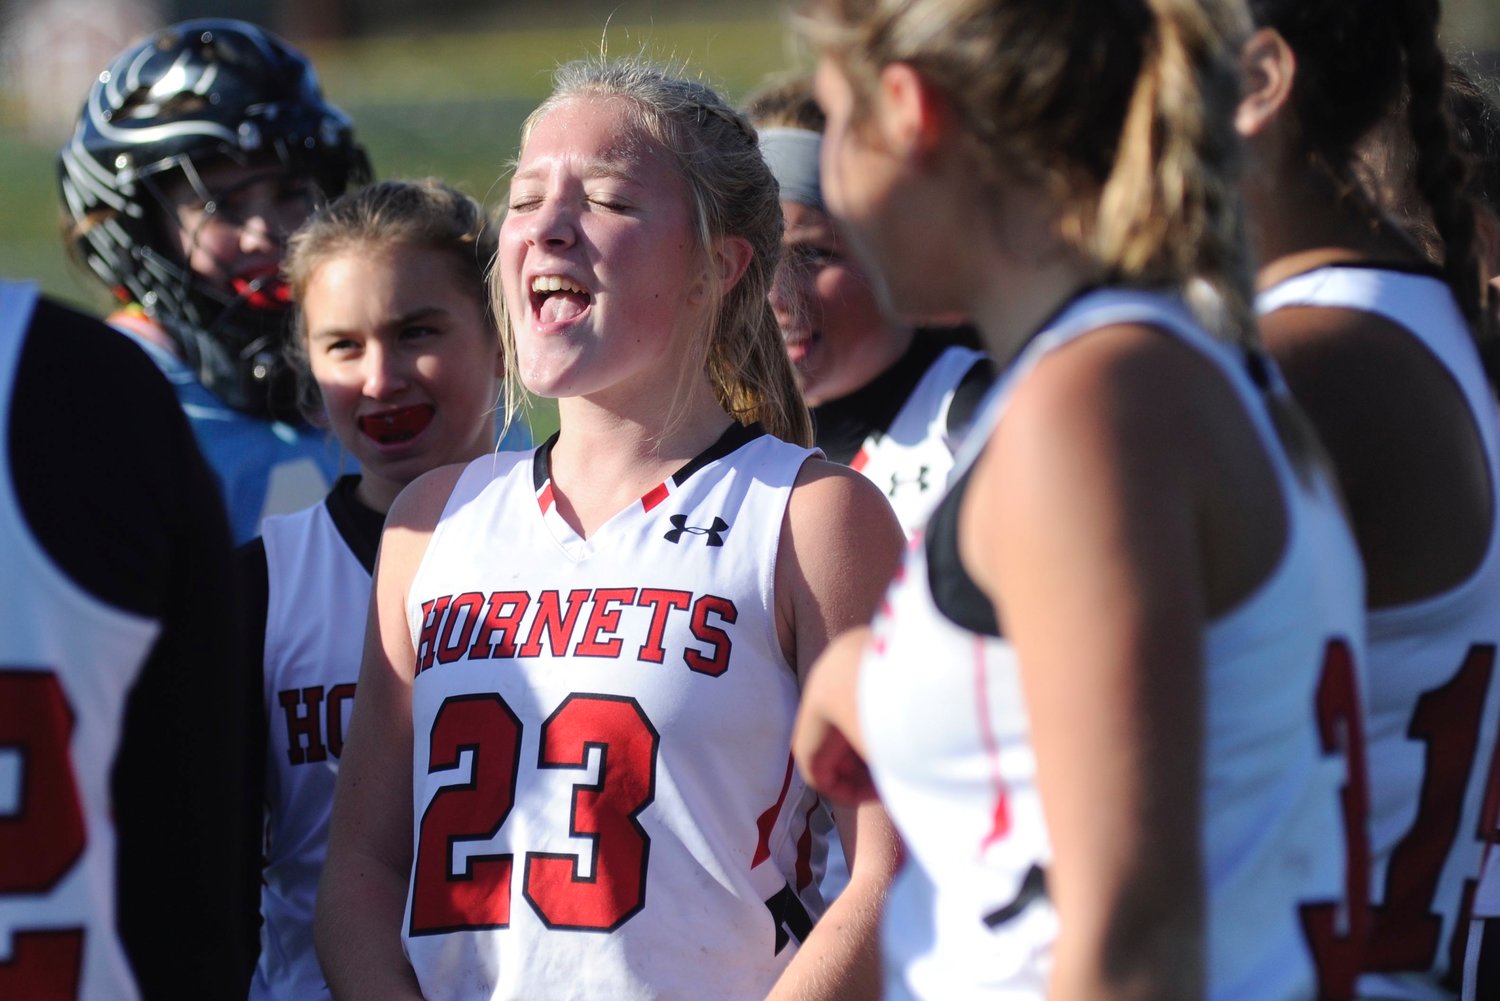 A joyful win. Honesdale’s Claire Campen celebrates the semi-final victory with her teammates.